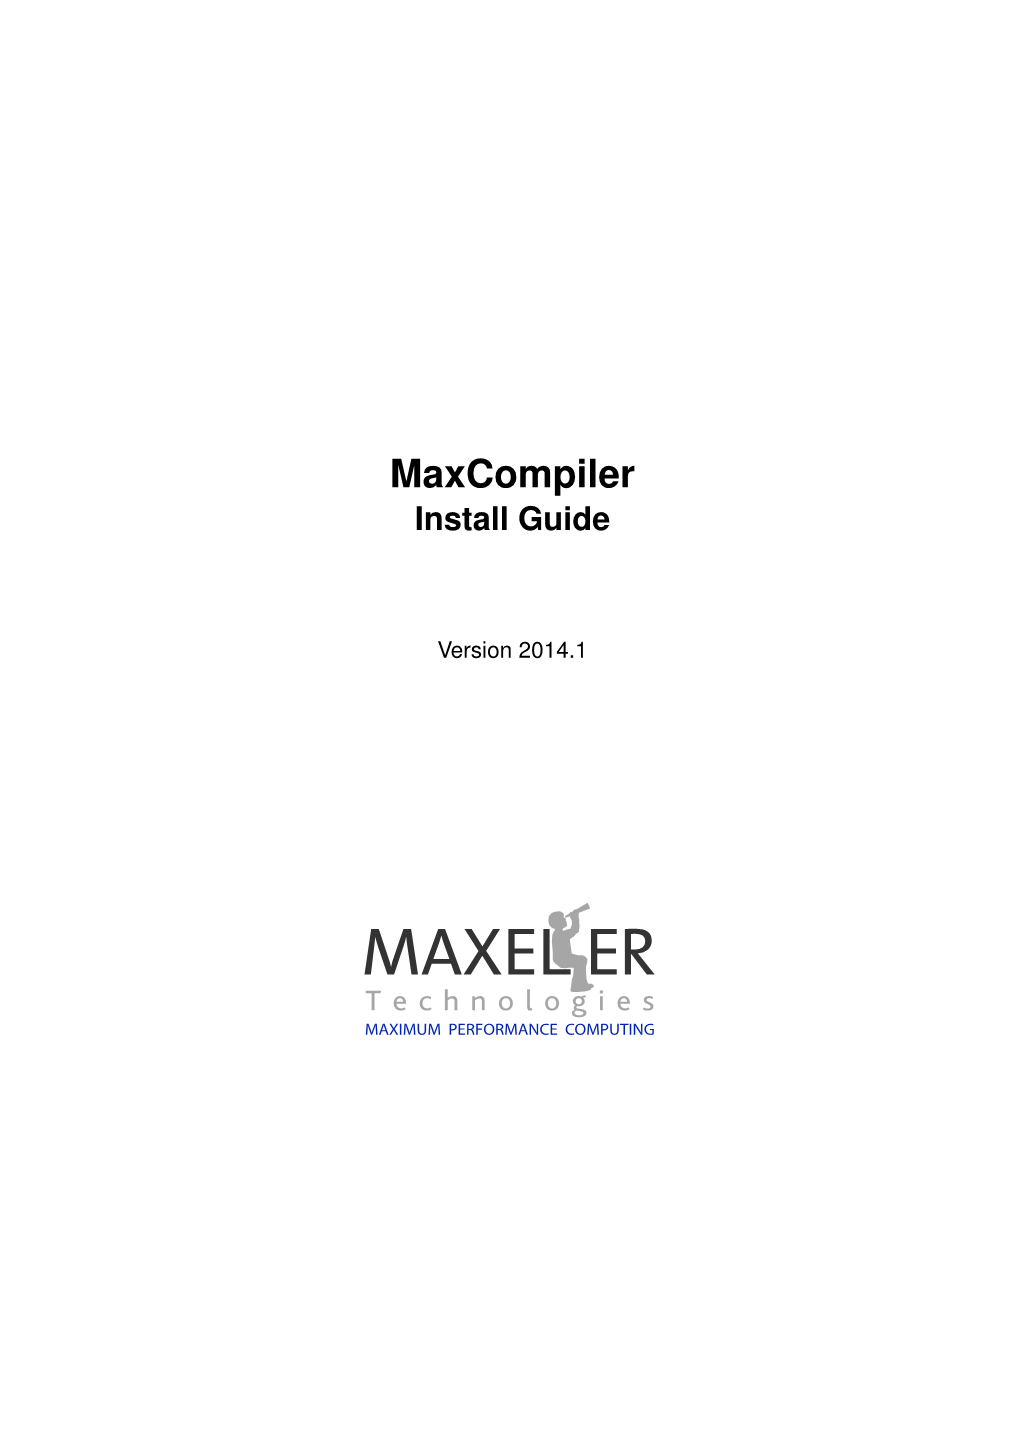 Maxcompiler: Install Guide 2 2 Third-Party Software